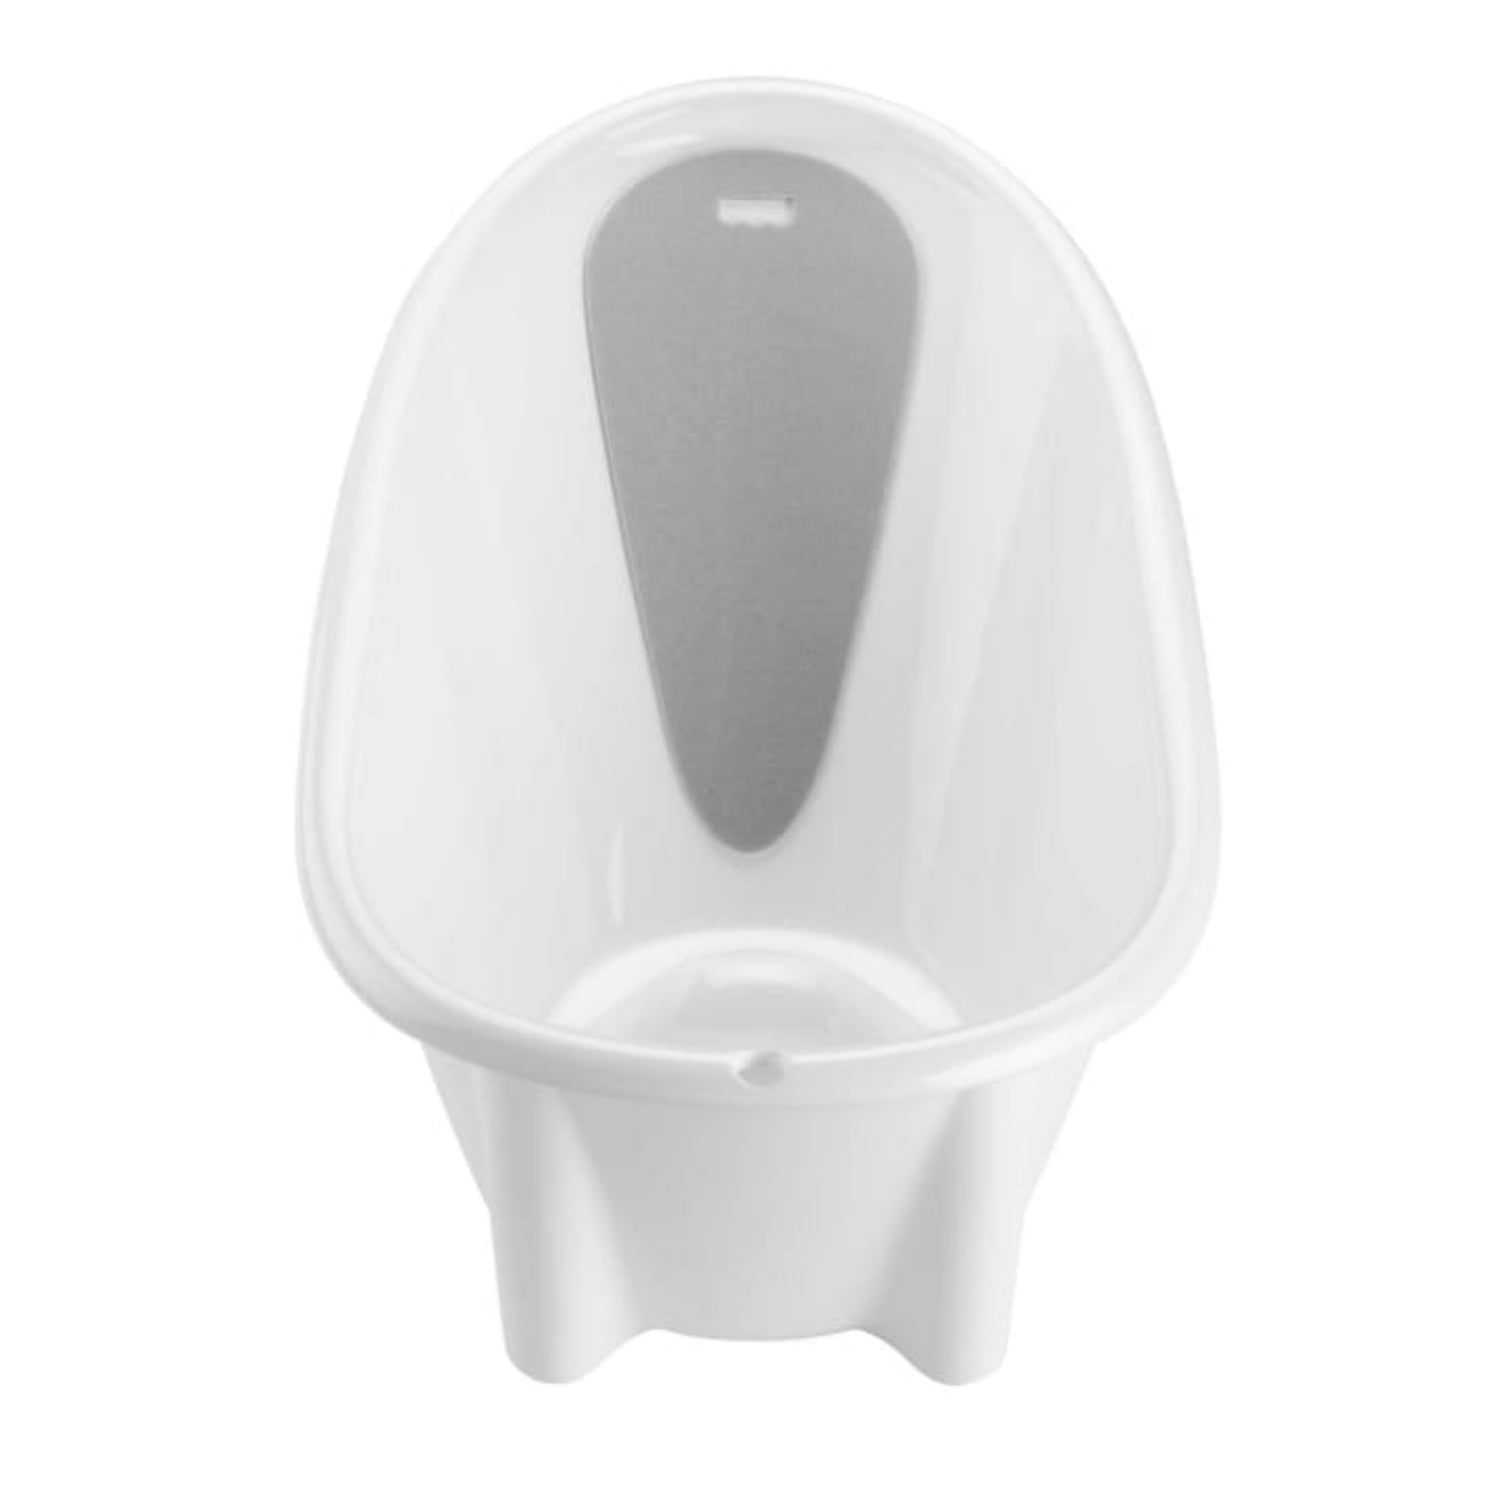 Fisher Price Simple Support™ Tub